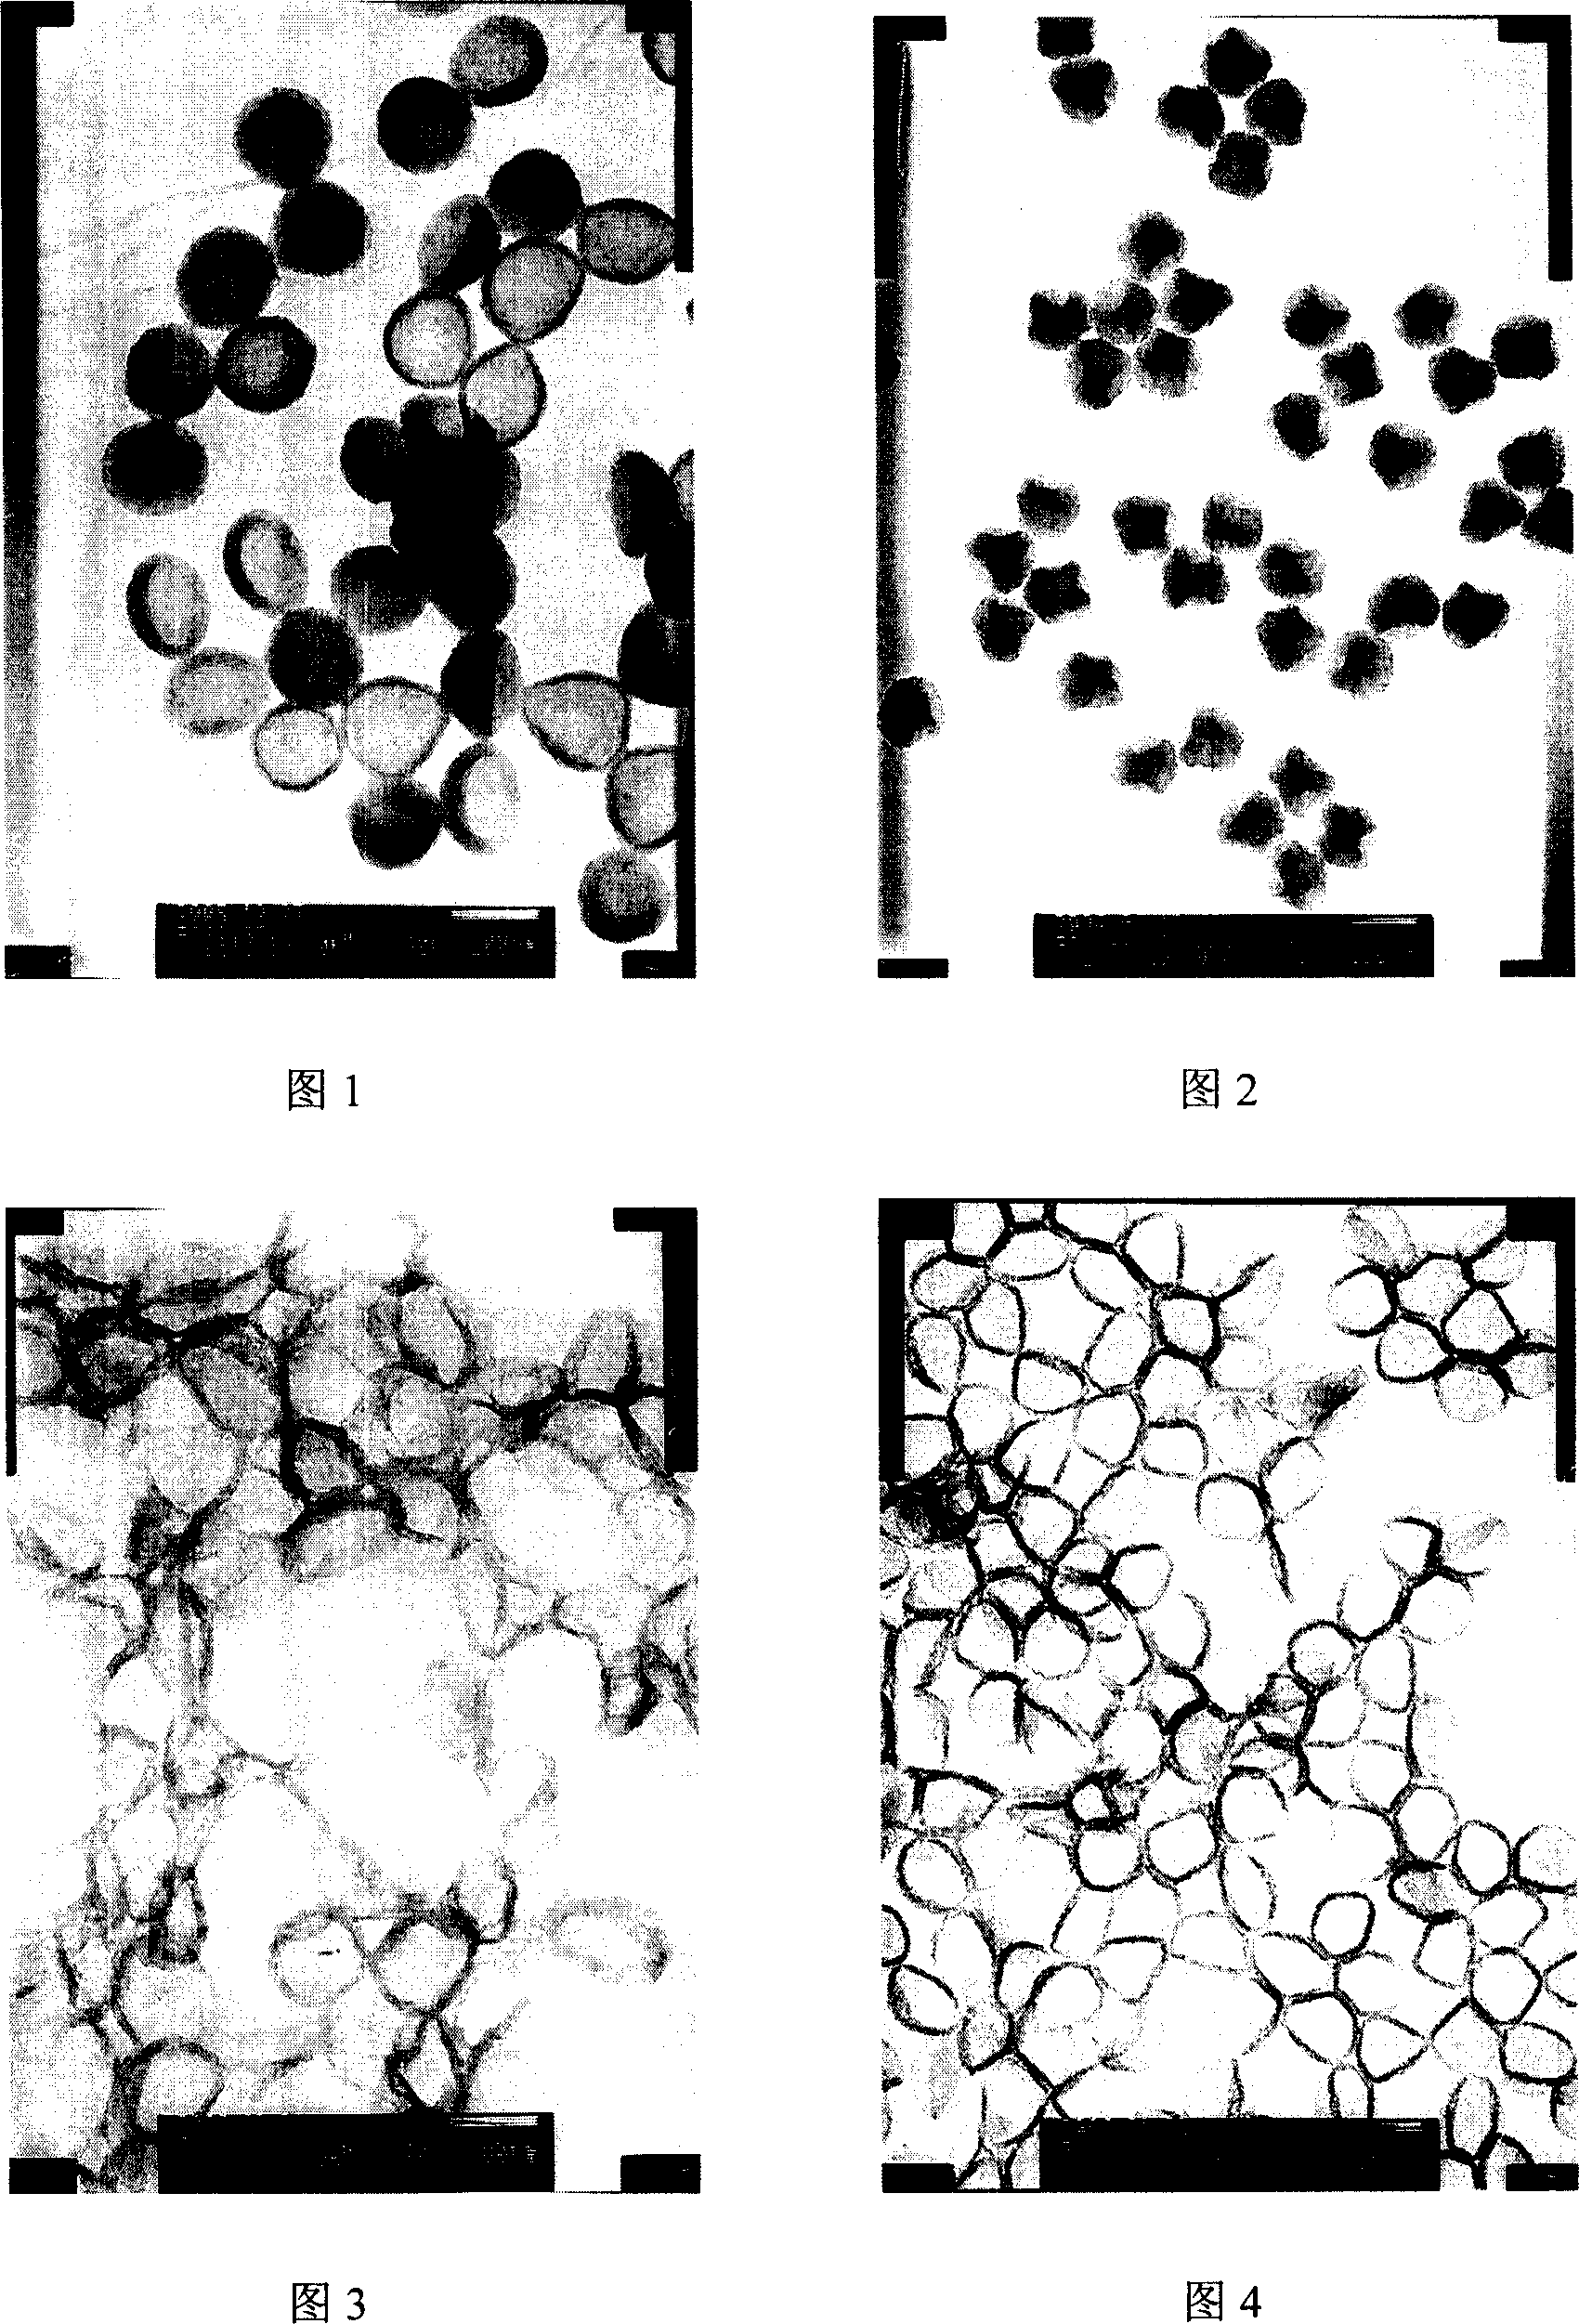 Mono-dispersed nano/micron polymer hollow microsphere resin and method for synthesizing the same